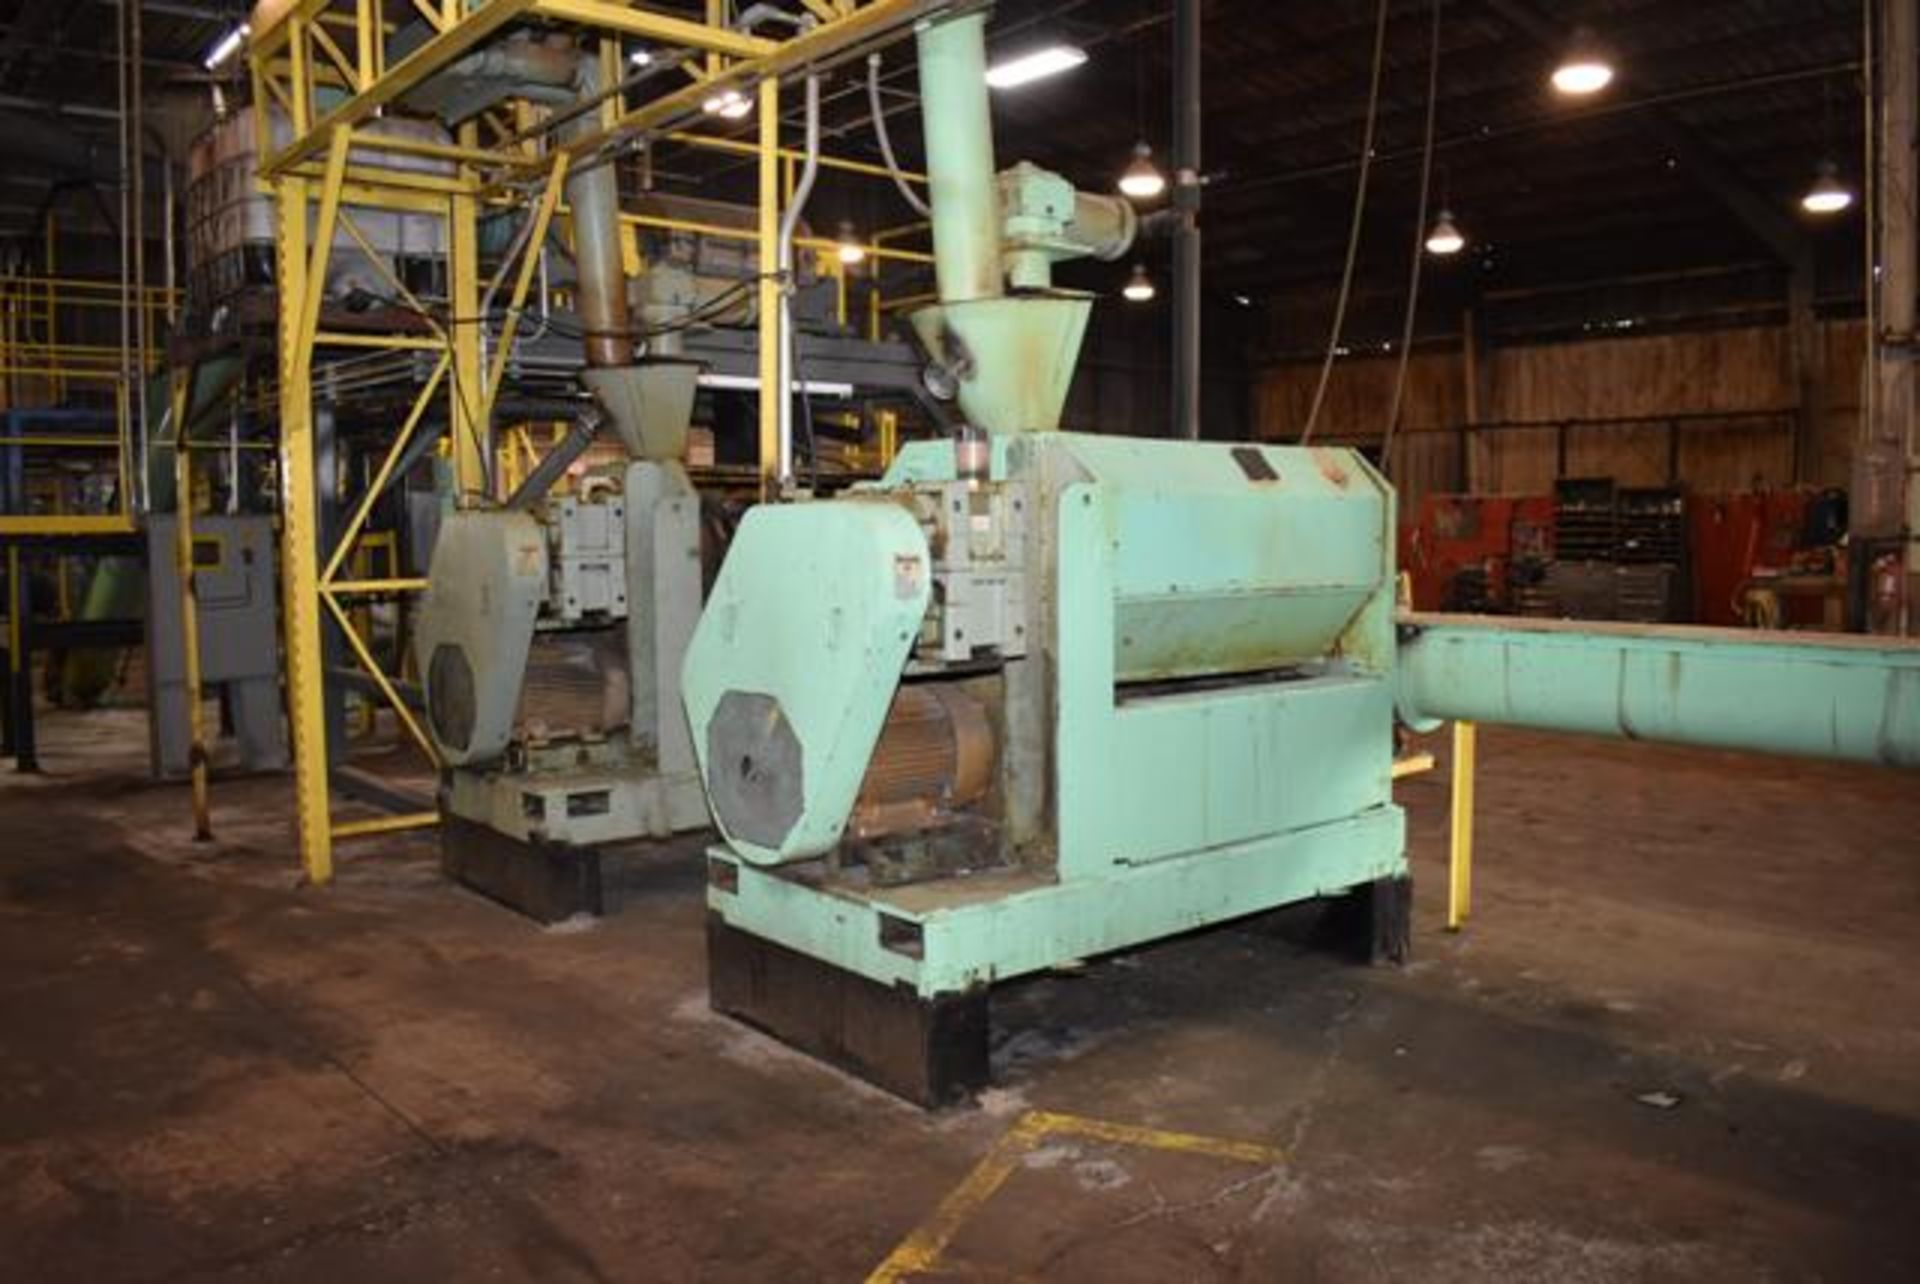 Insta-Pro Model 4500 Press, Includes Feeder and Crammer, 50 HP Motor. LOADING FEE: $3000